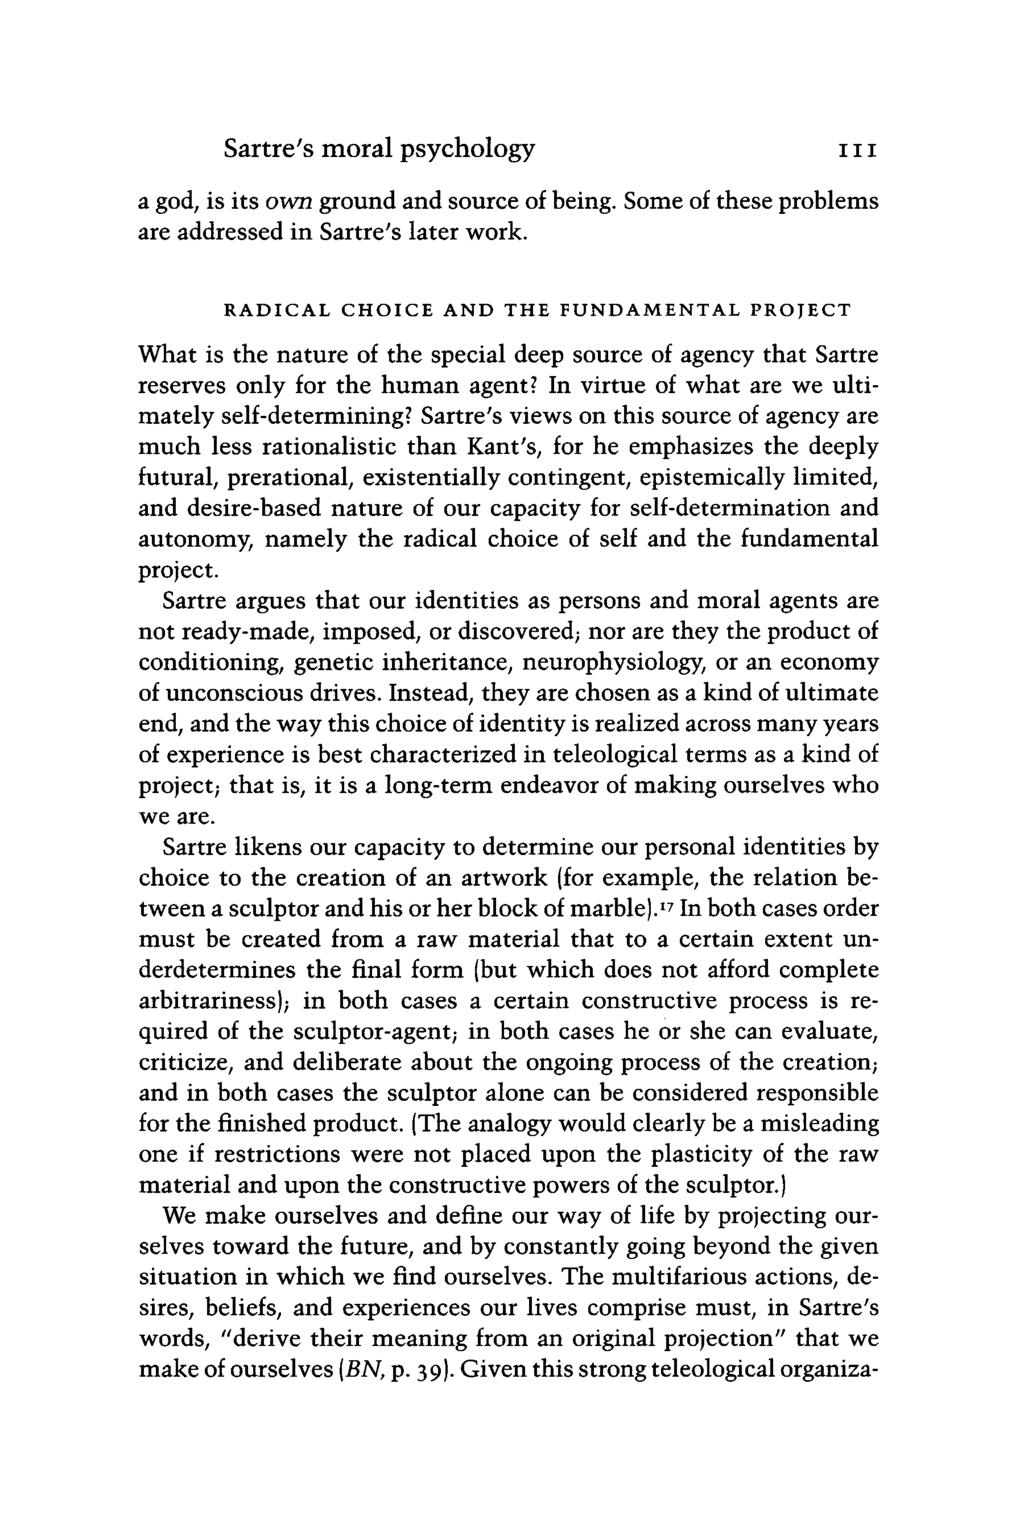 Sartre's moral psychology 111 a god, is its own ground and source of being. Some of these problems are addressed in Sartre's later work.